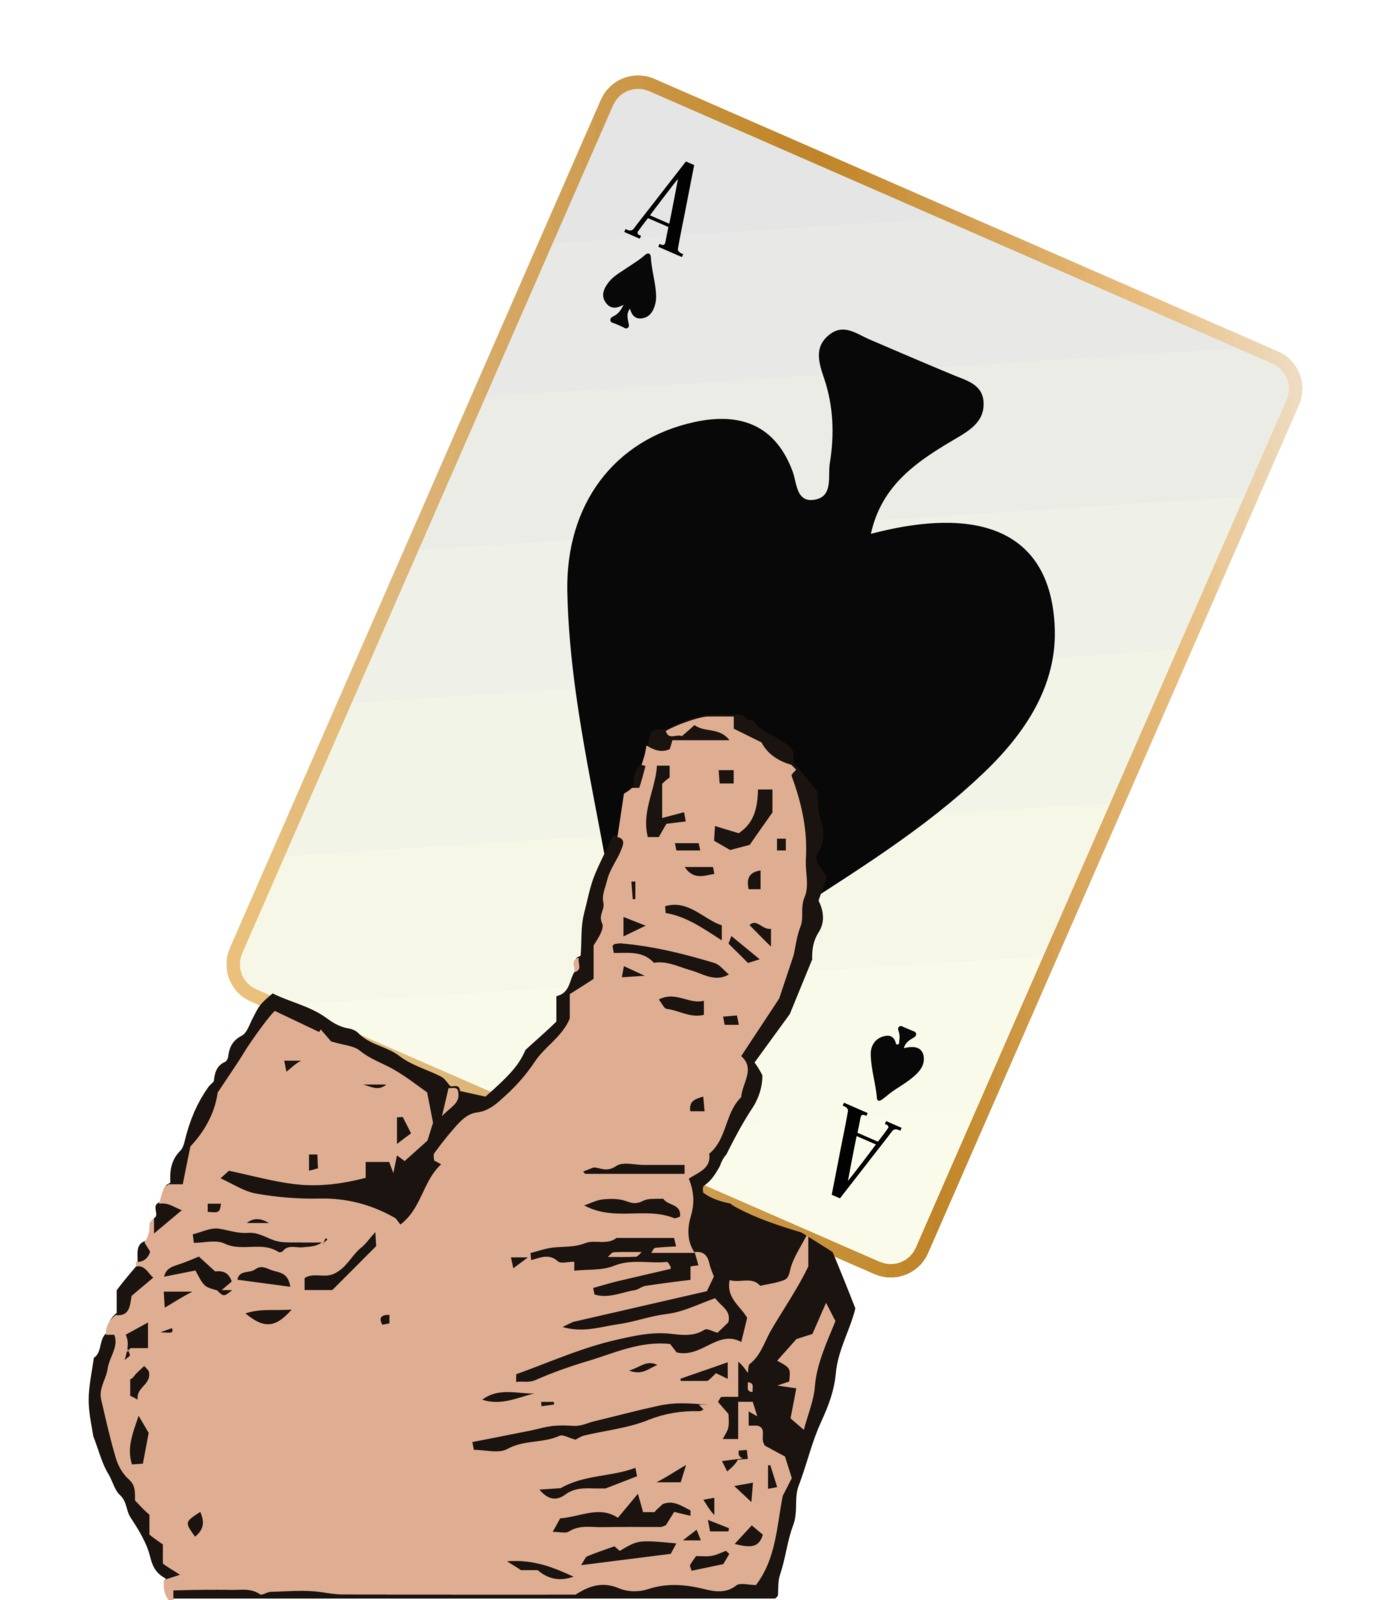 A cartoon hand holding the ace of spades over a white background